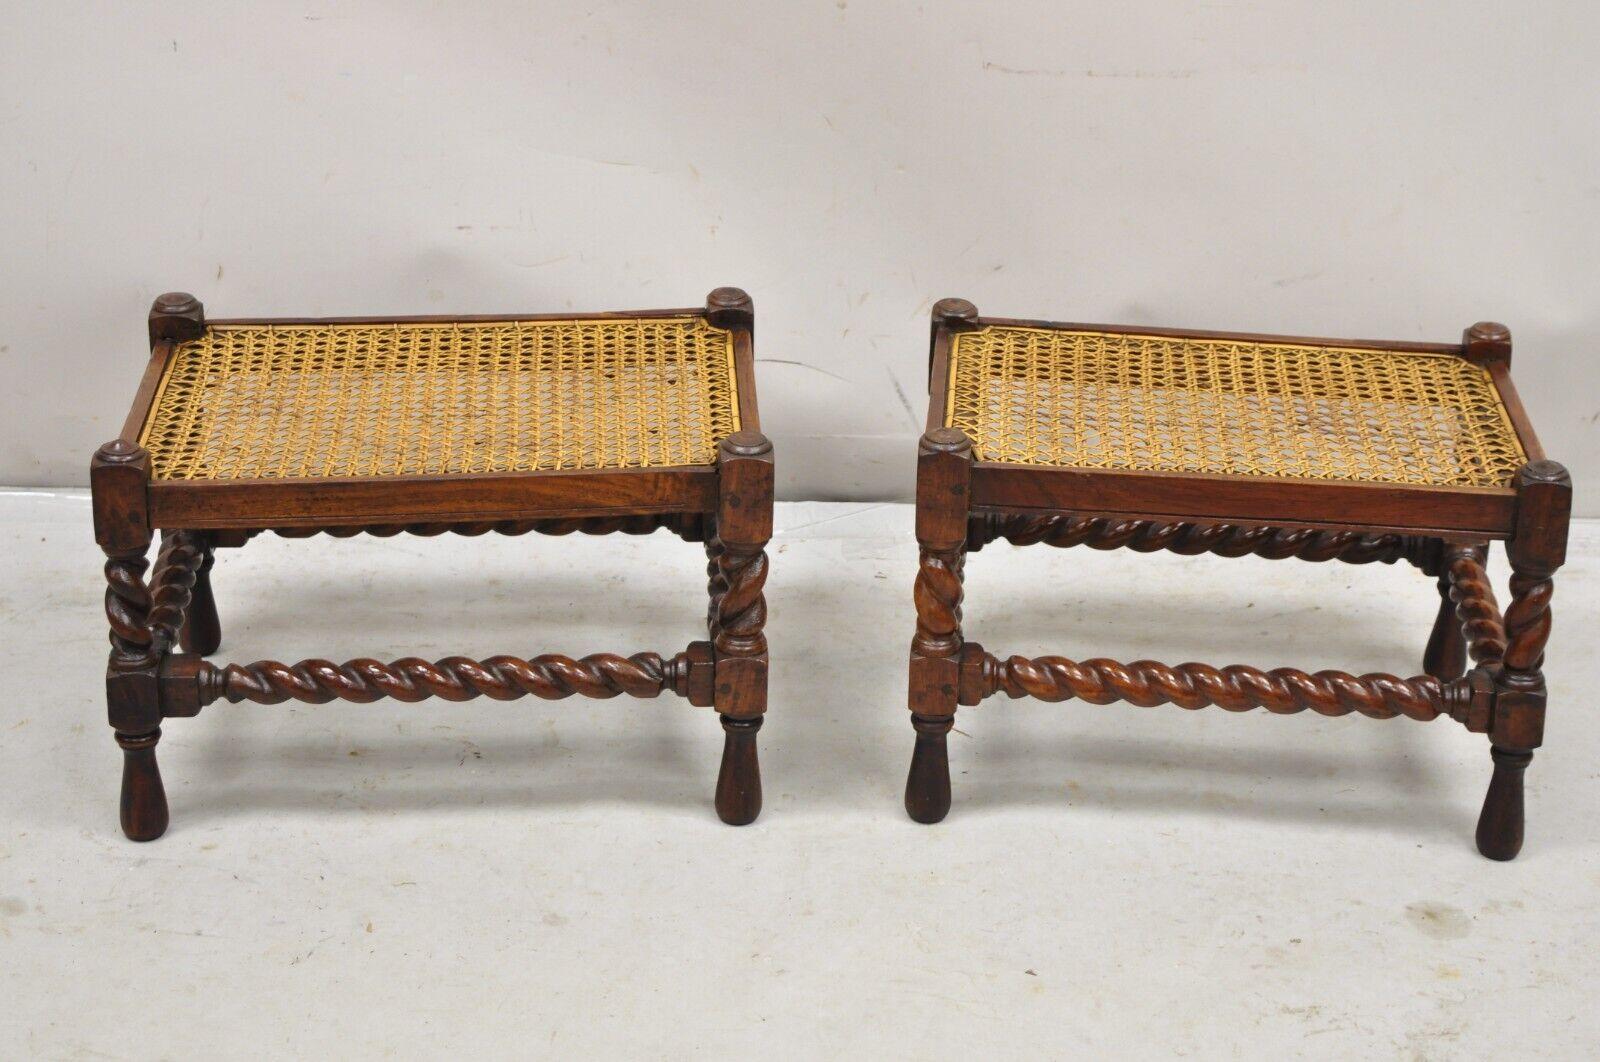 Antique Jacobean Turn Carved Spiral Twist Walnut Handmade Cane Seat Footstool Ottoman - Pair. Item features hand woven cane seats, beautiful wood grain, very nice complimentary pair (one stool is slightly larger than the other) Circa  19th